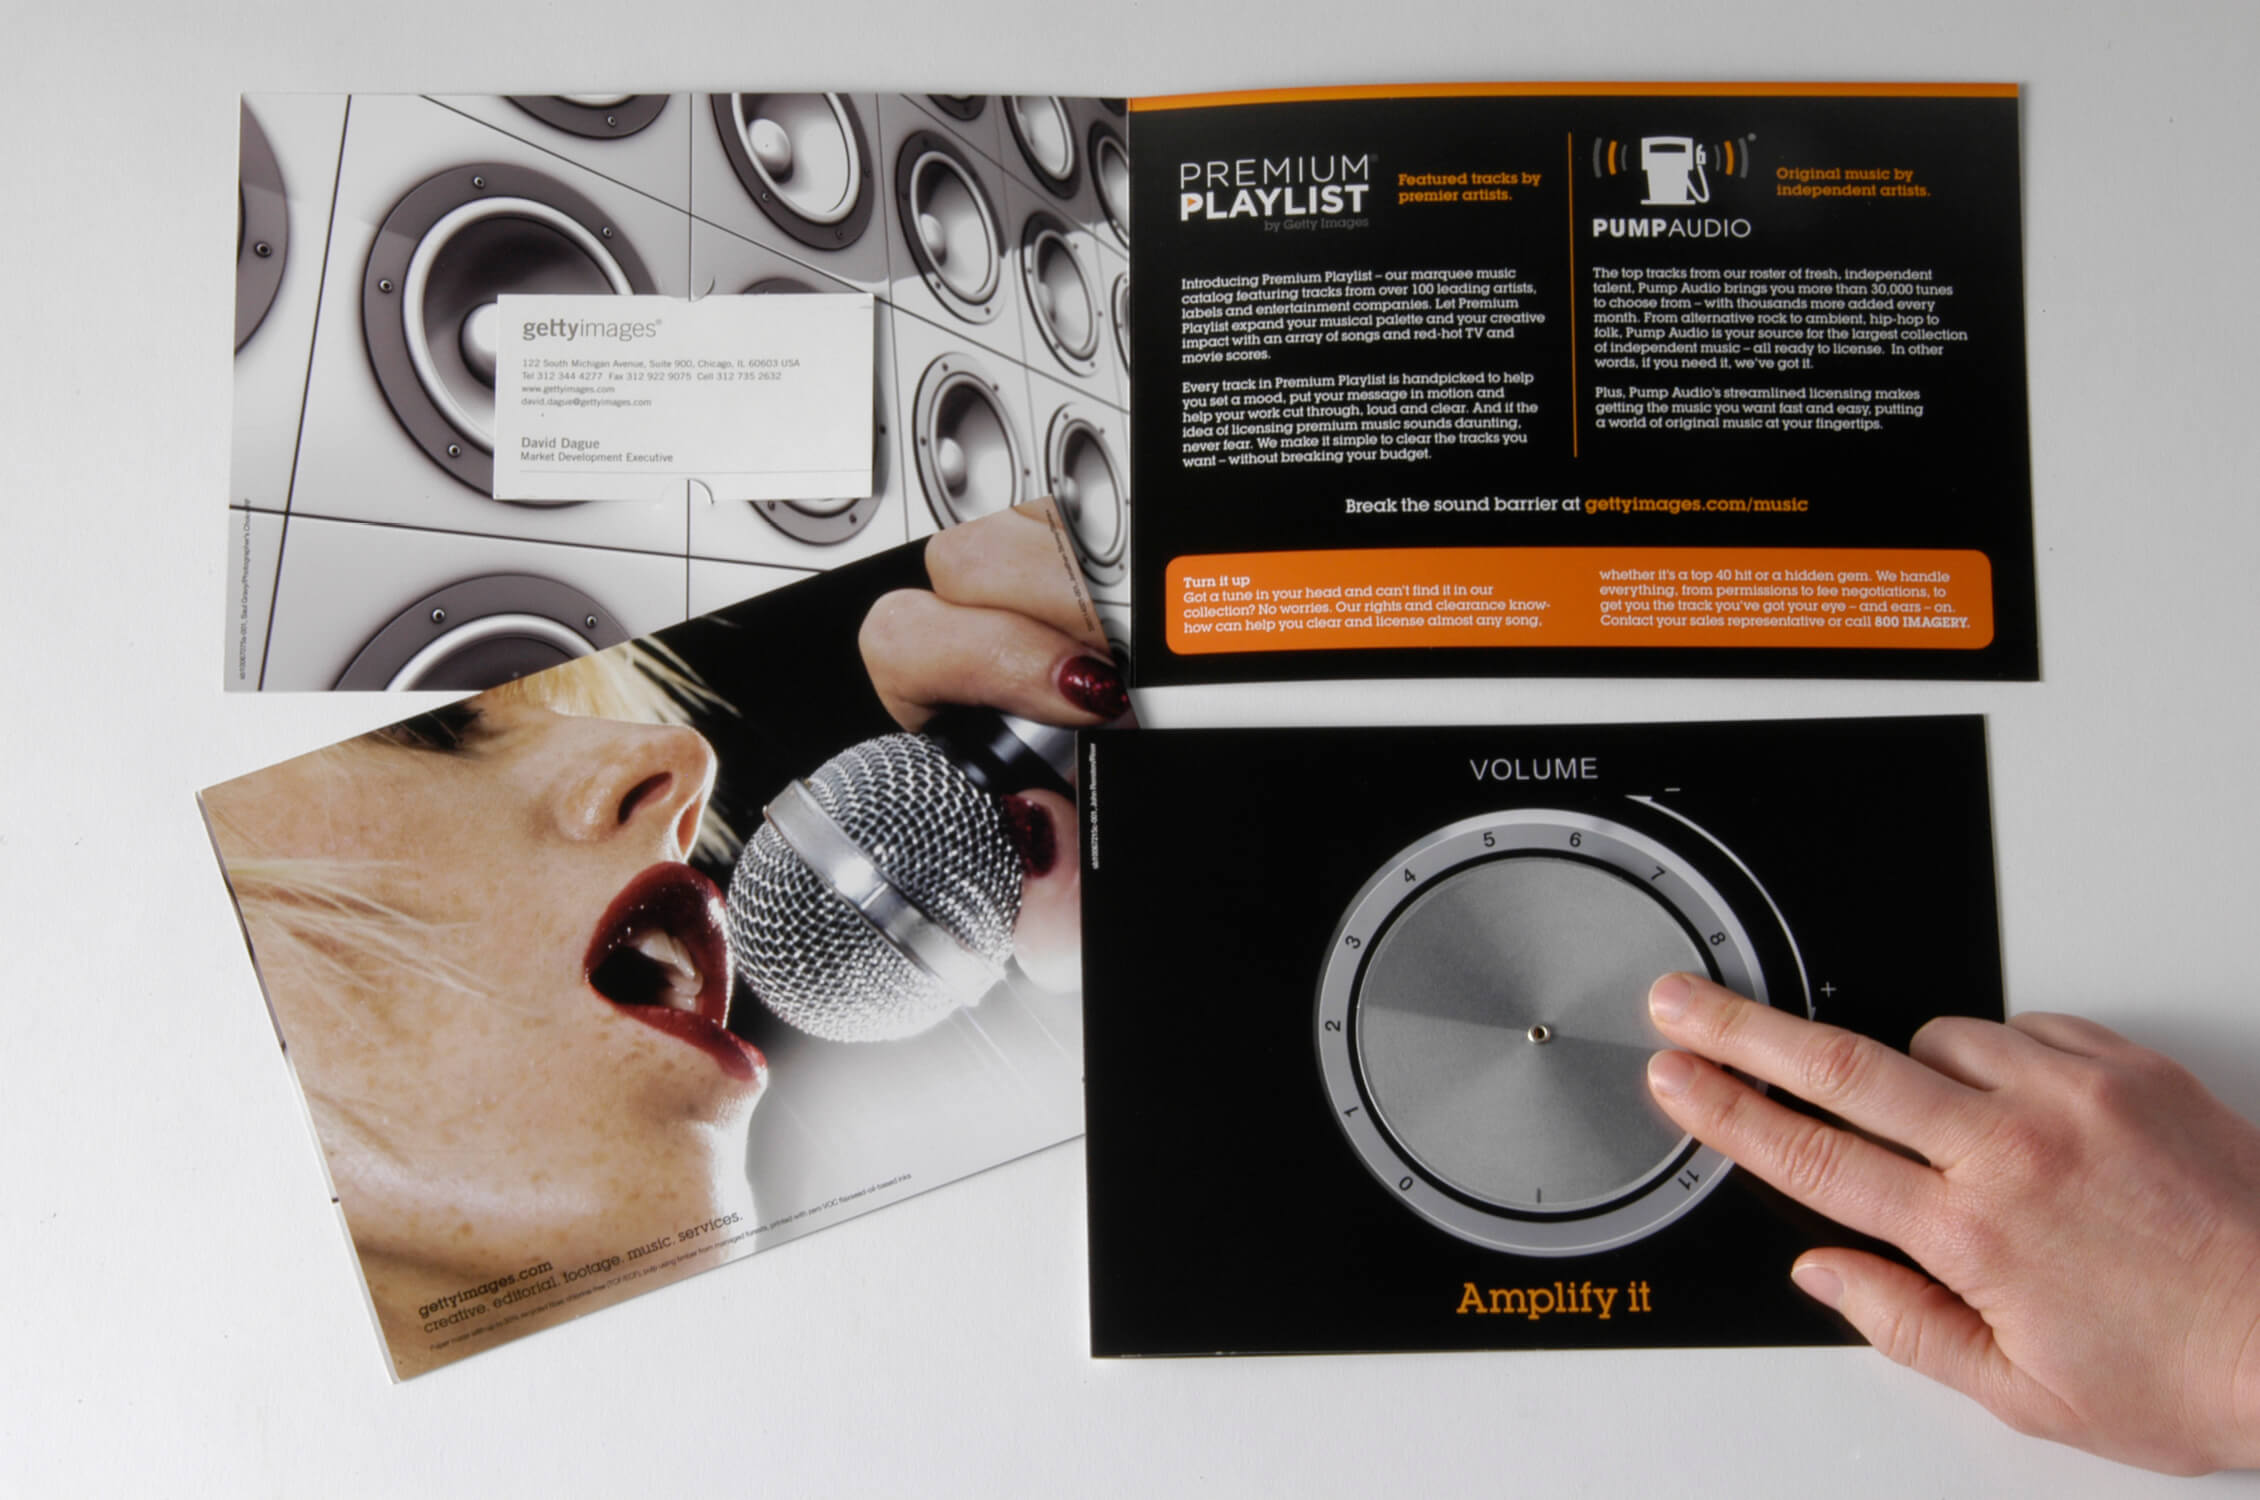 getty images direct mail volume image